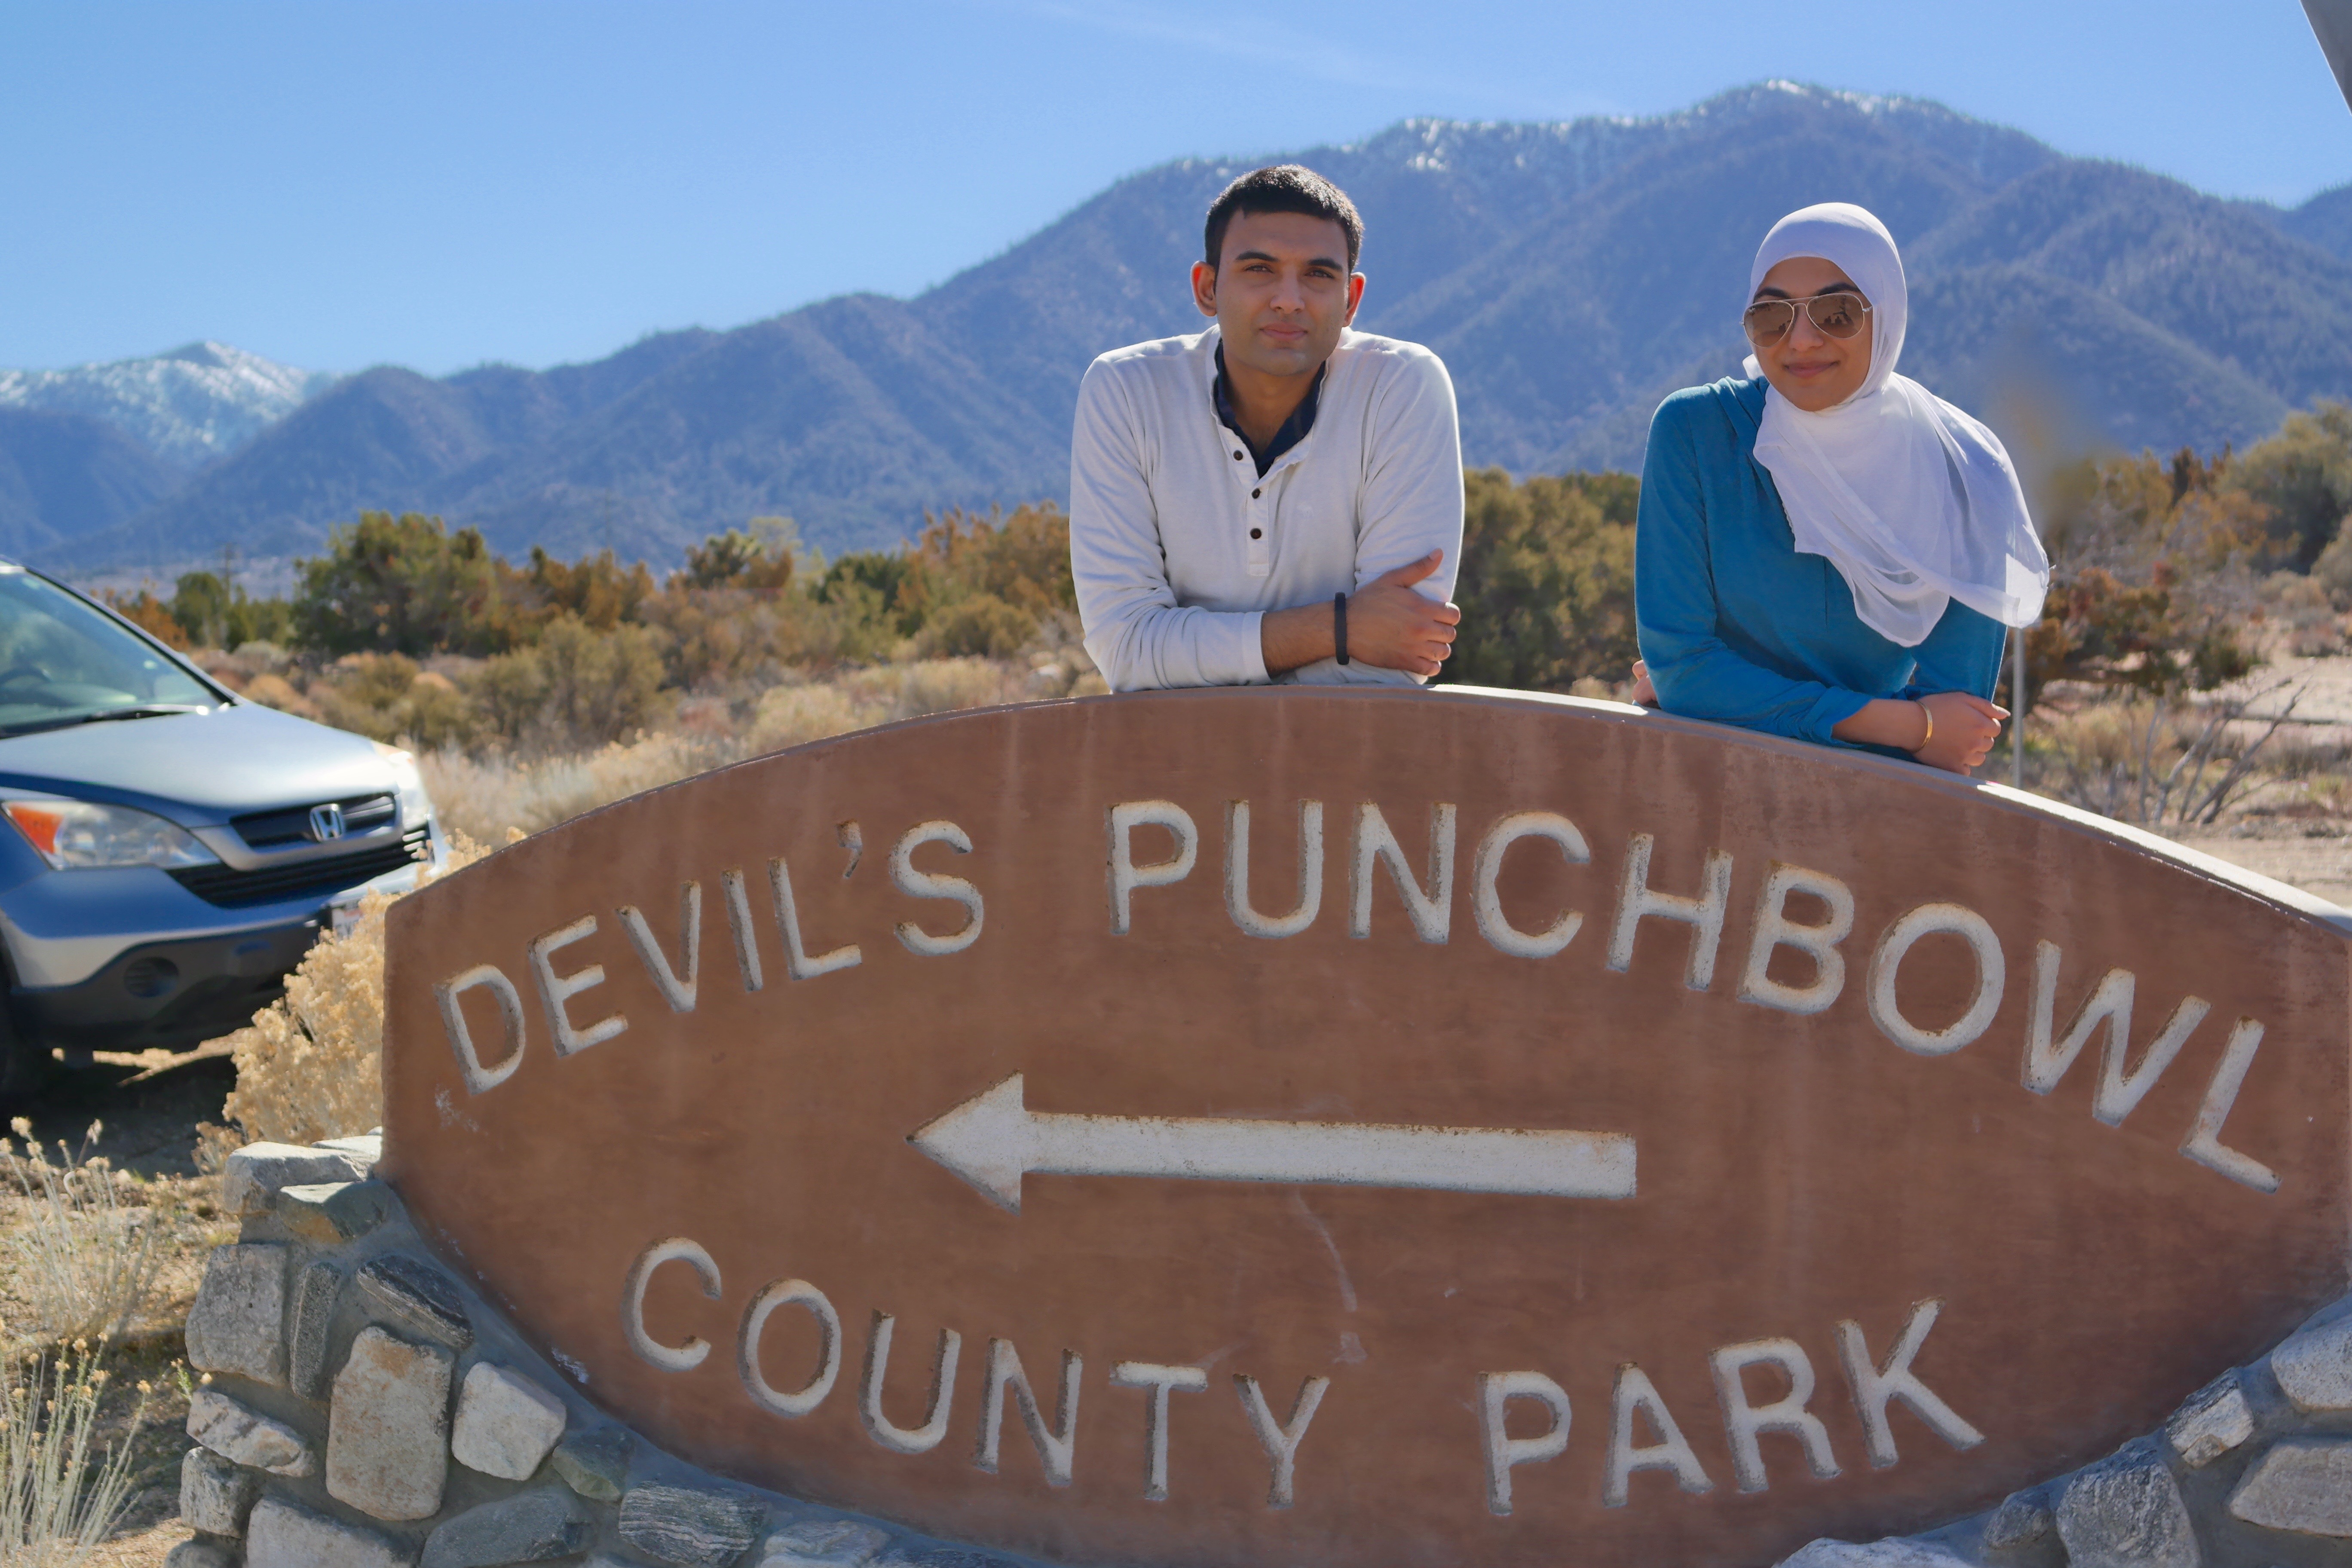 Devil’s Punchbowl and Frozen Chaos